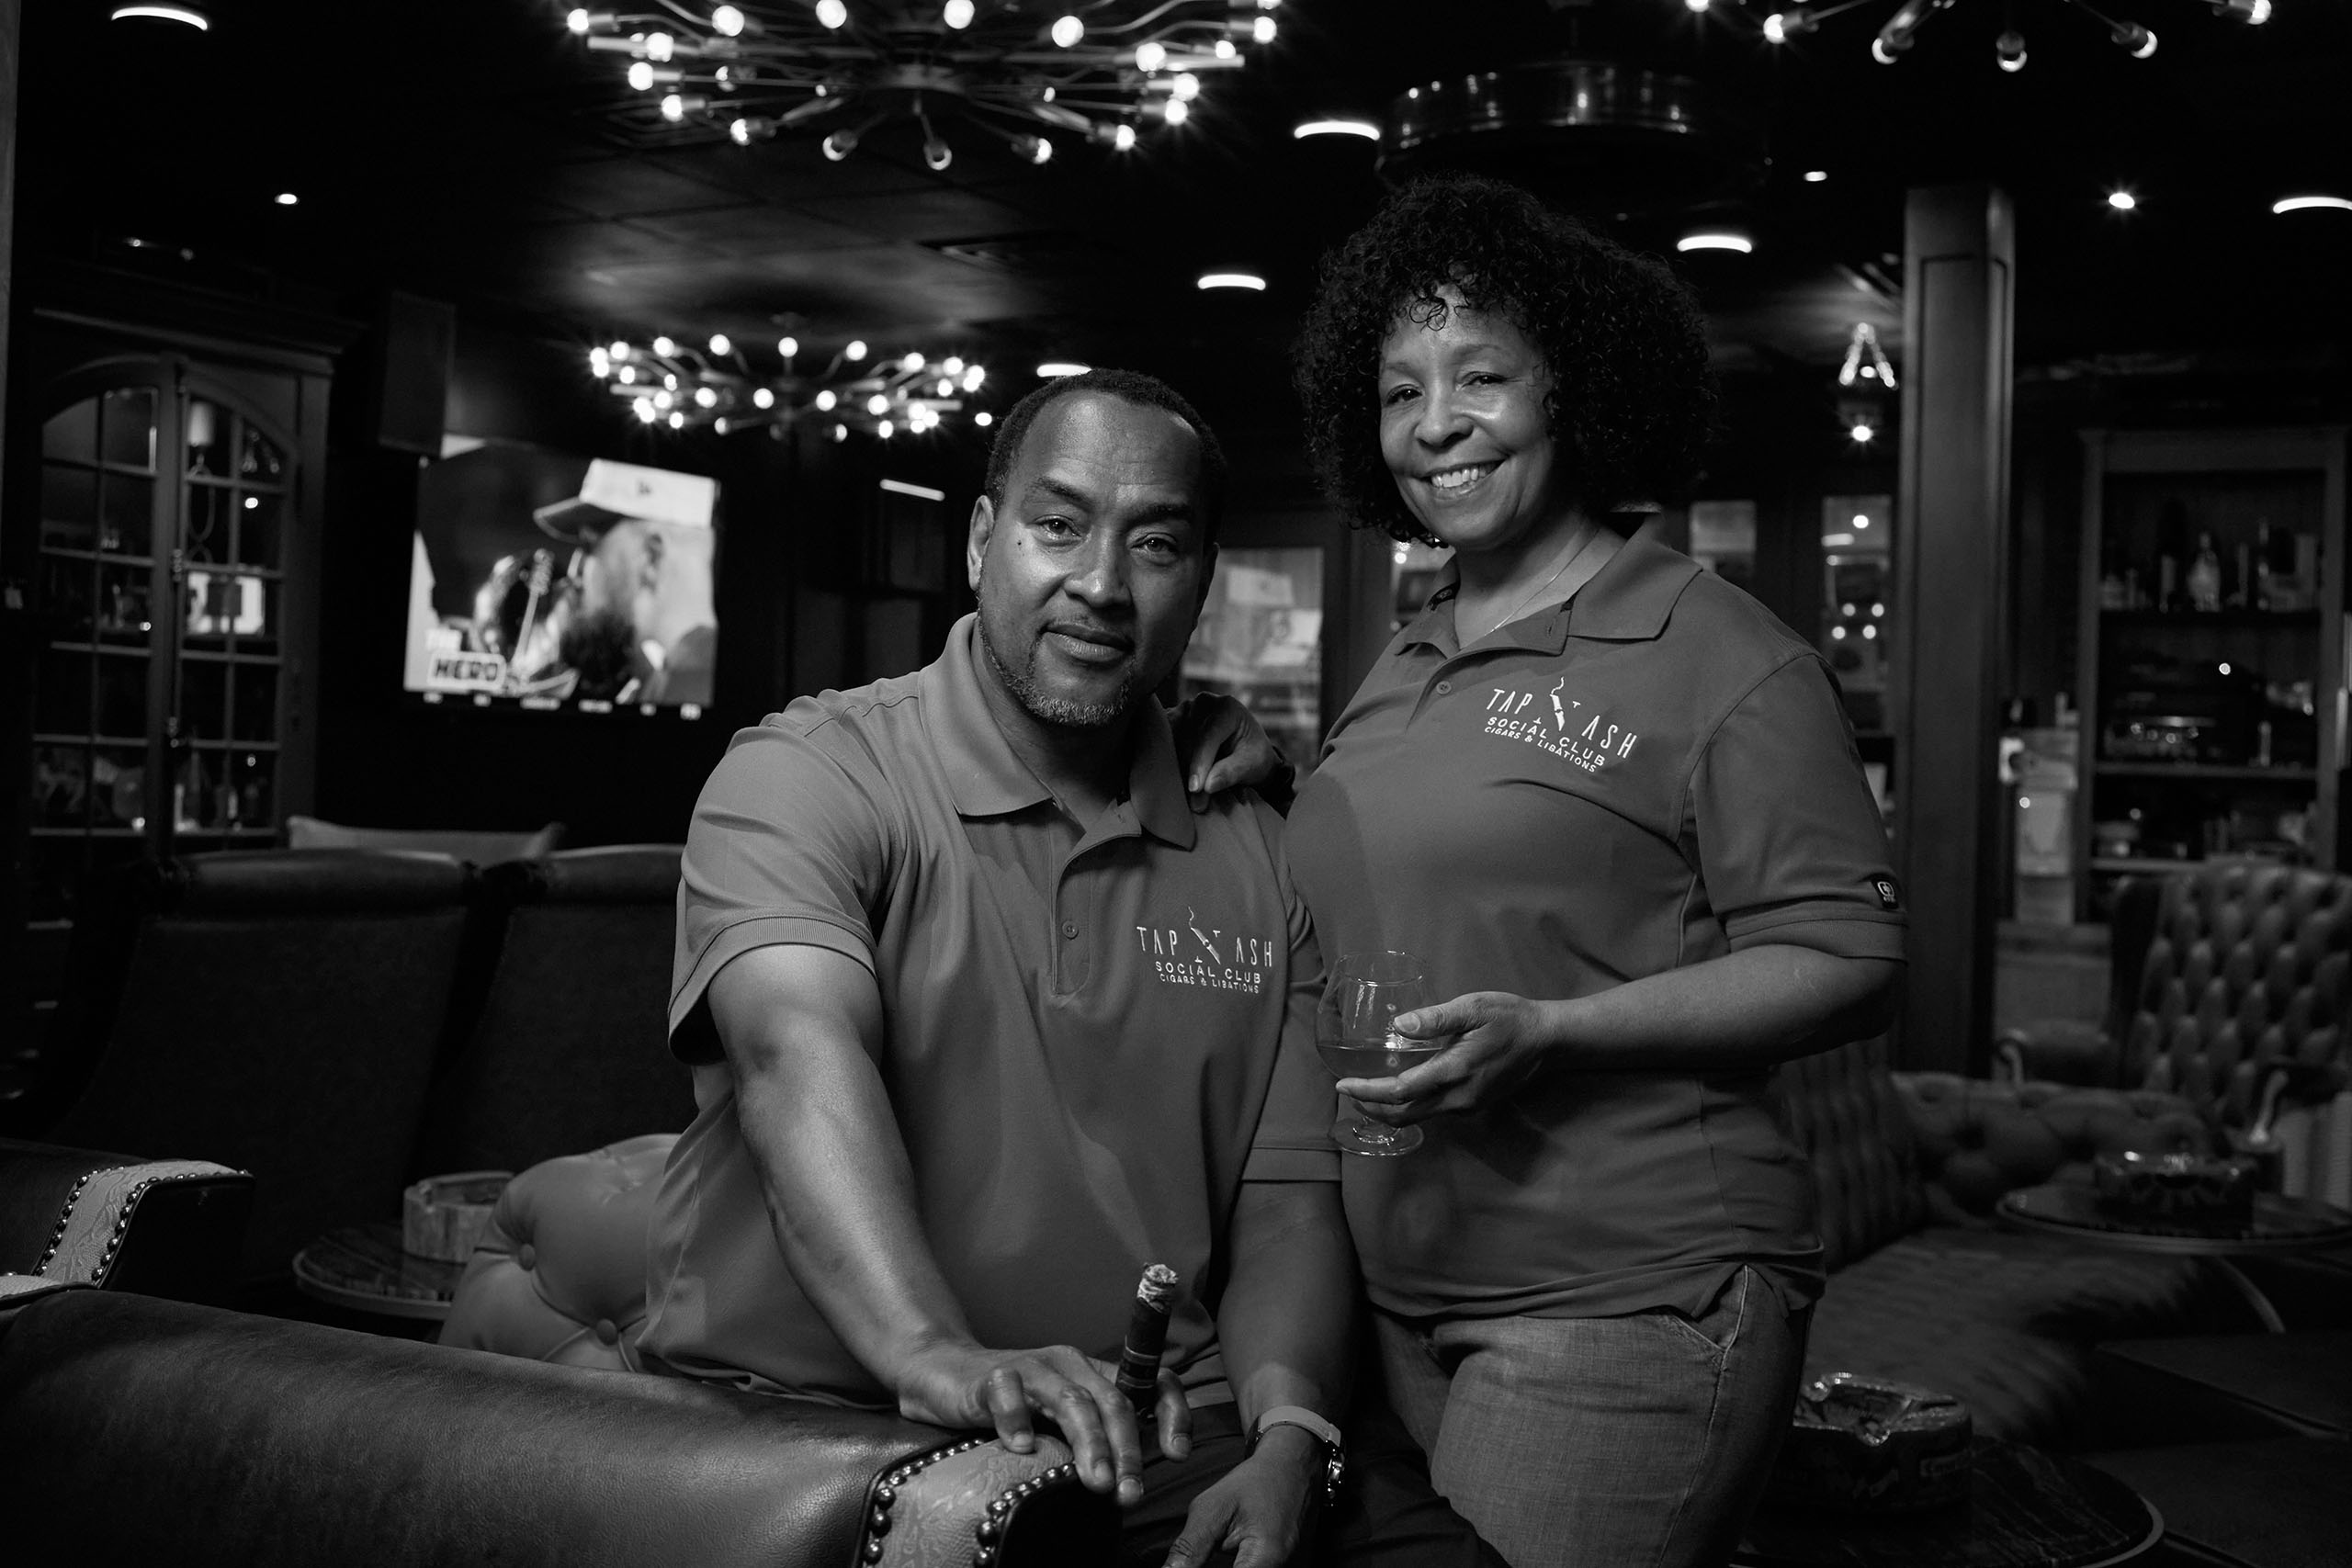 Portrait of Melvin and Michelle Runles of Tap N Ash Social Club.